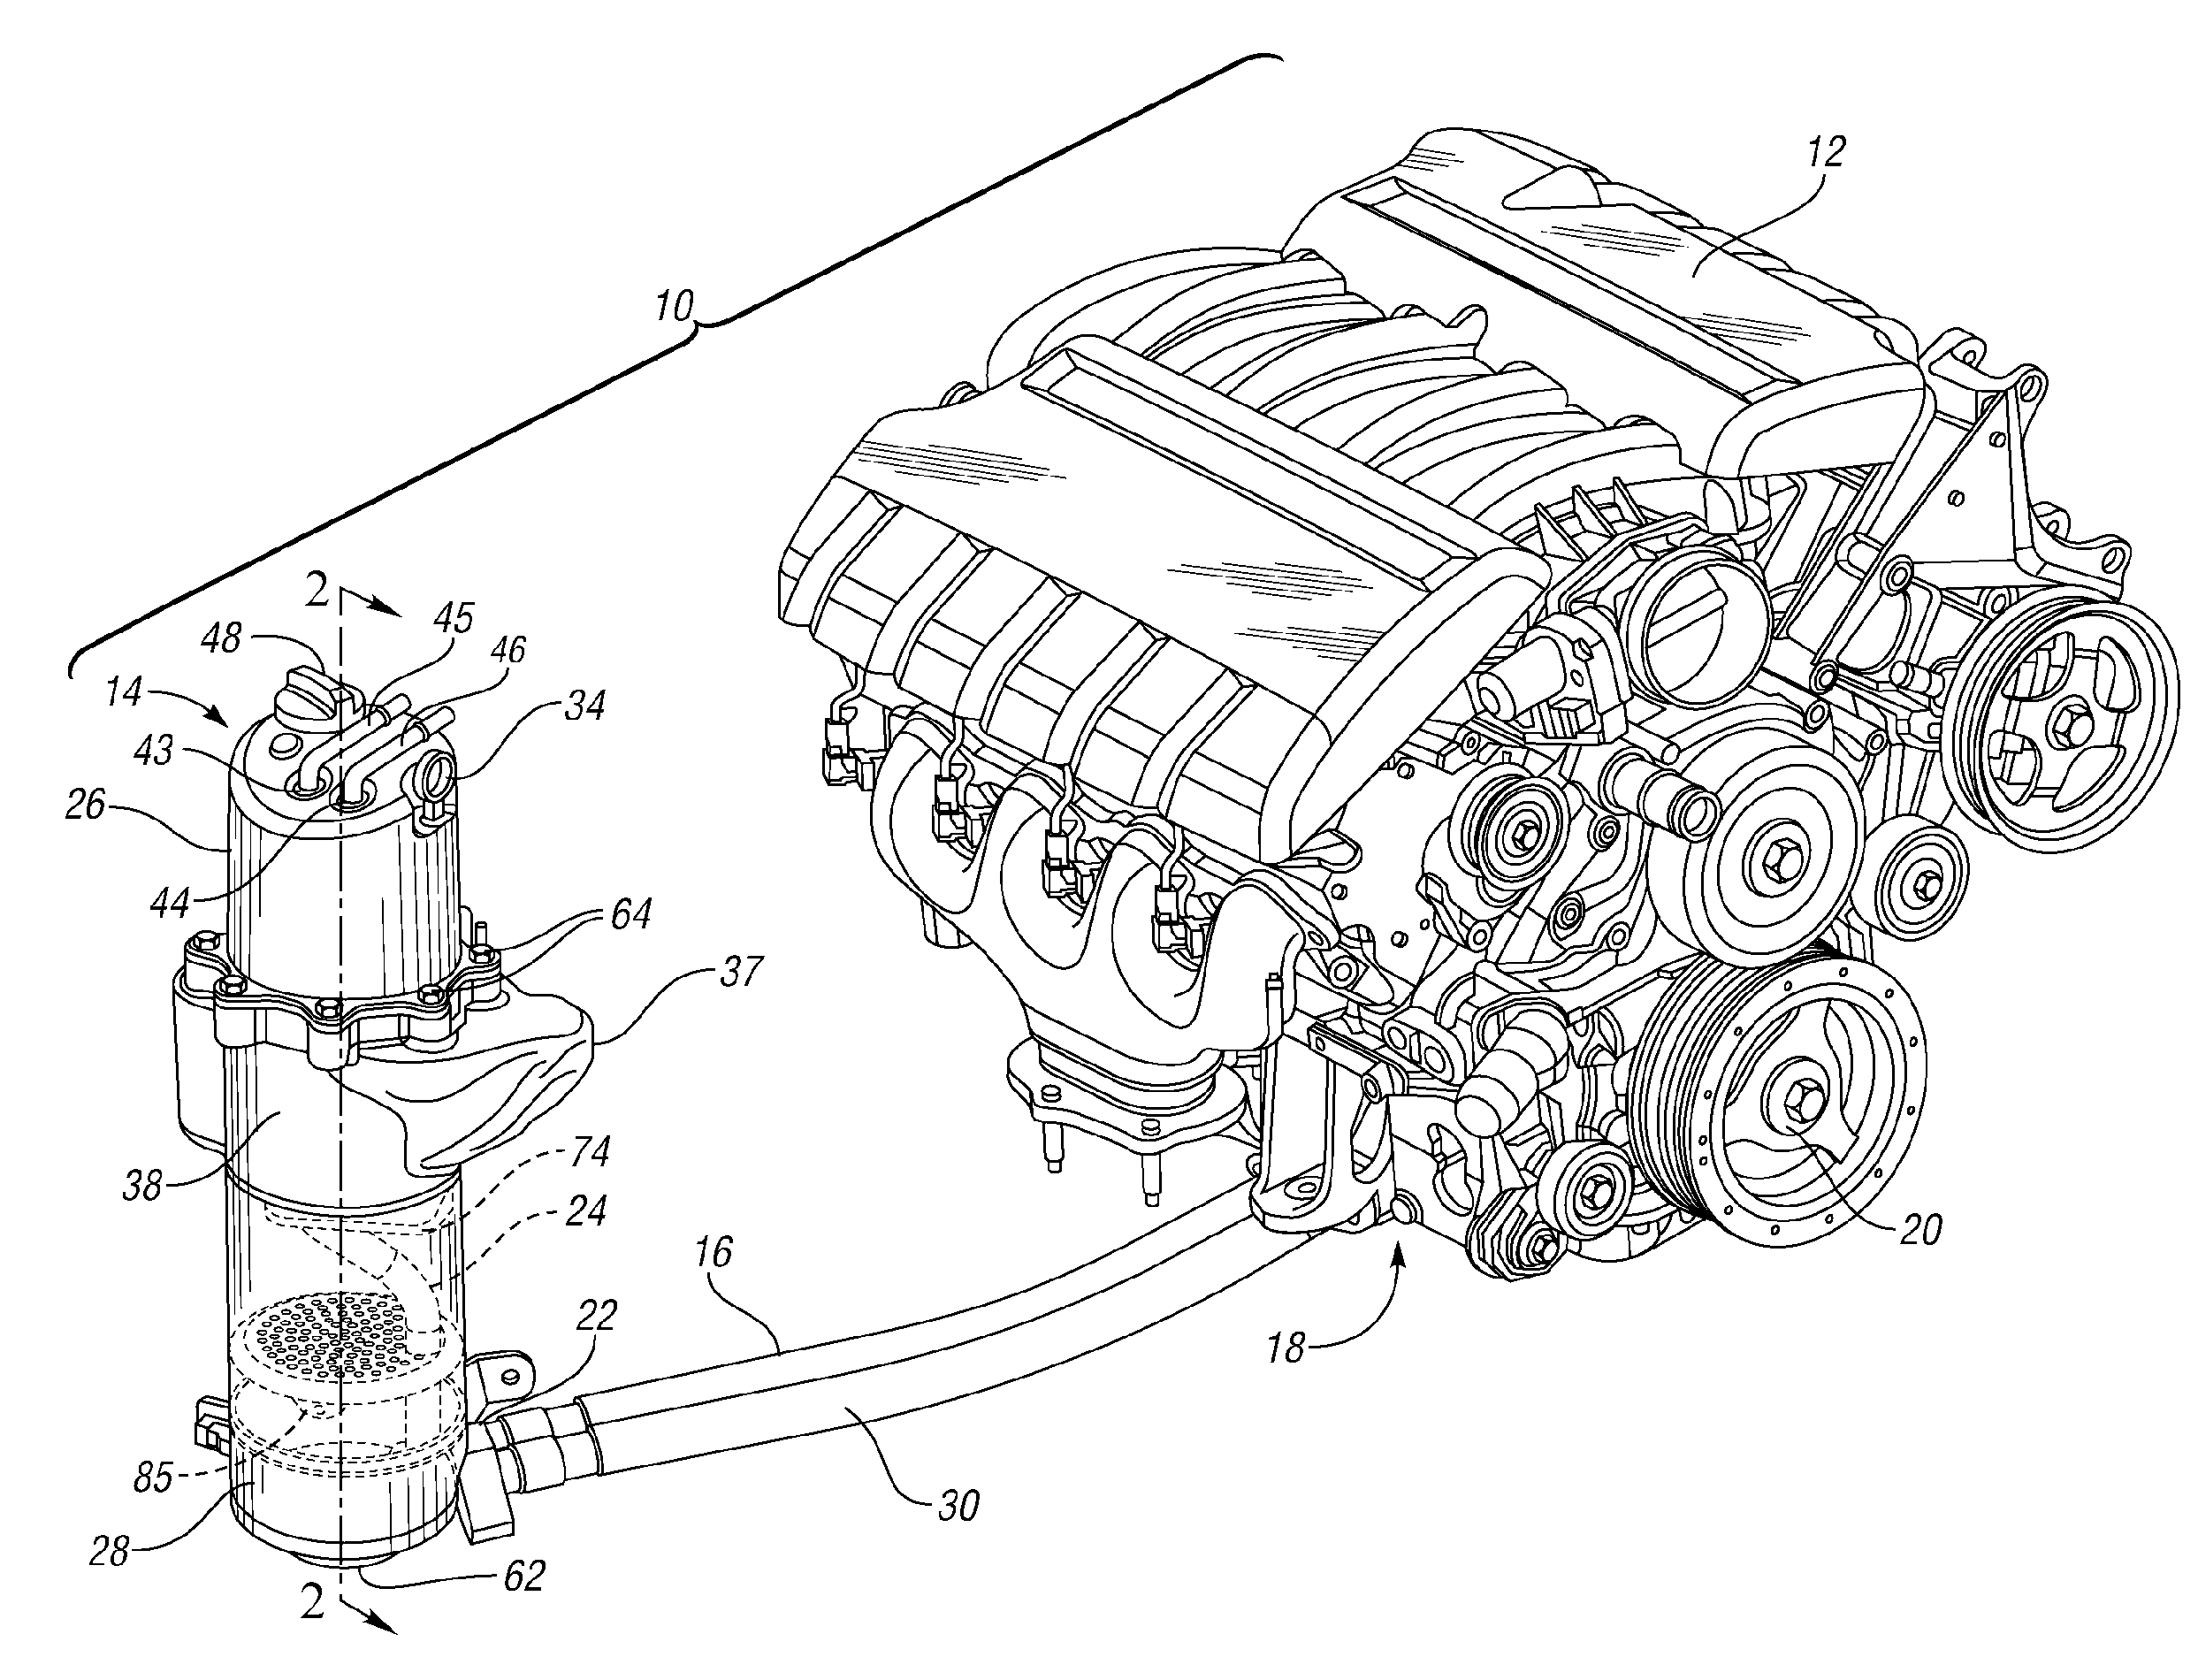 Dry sump oil tank assembly for a vehicle